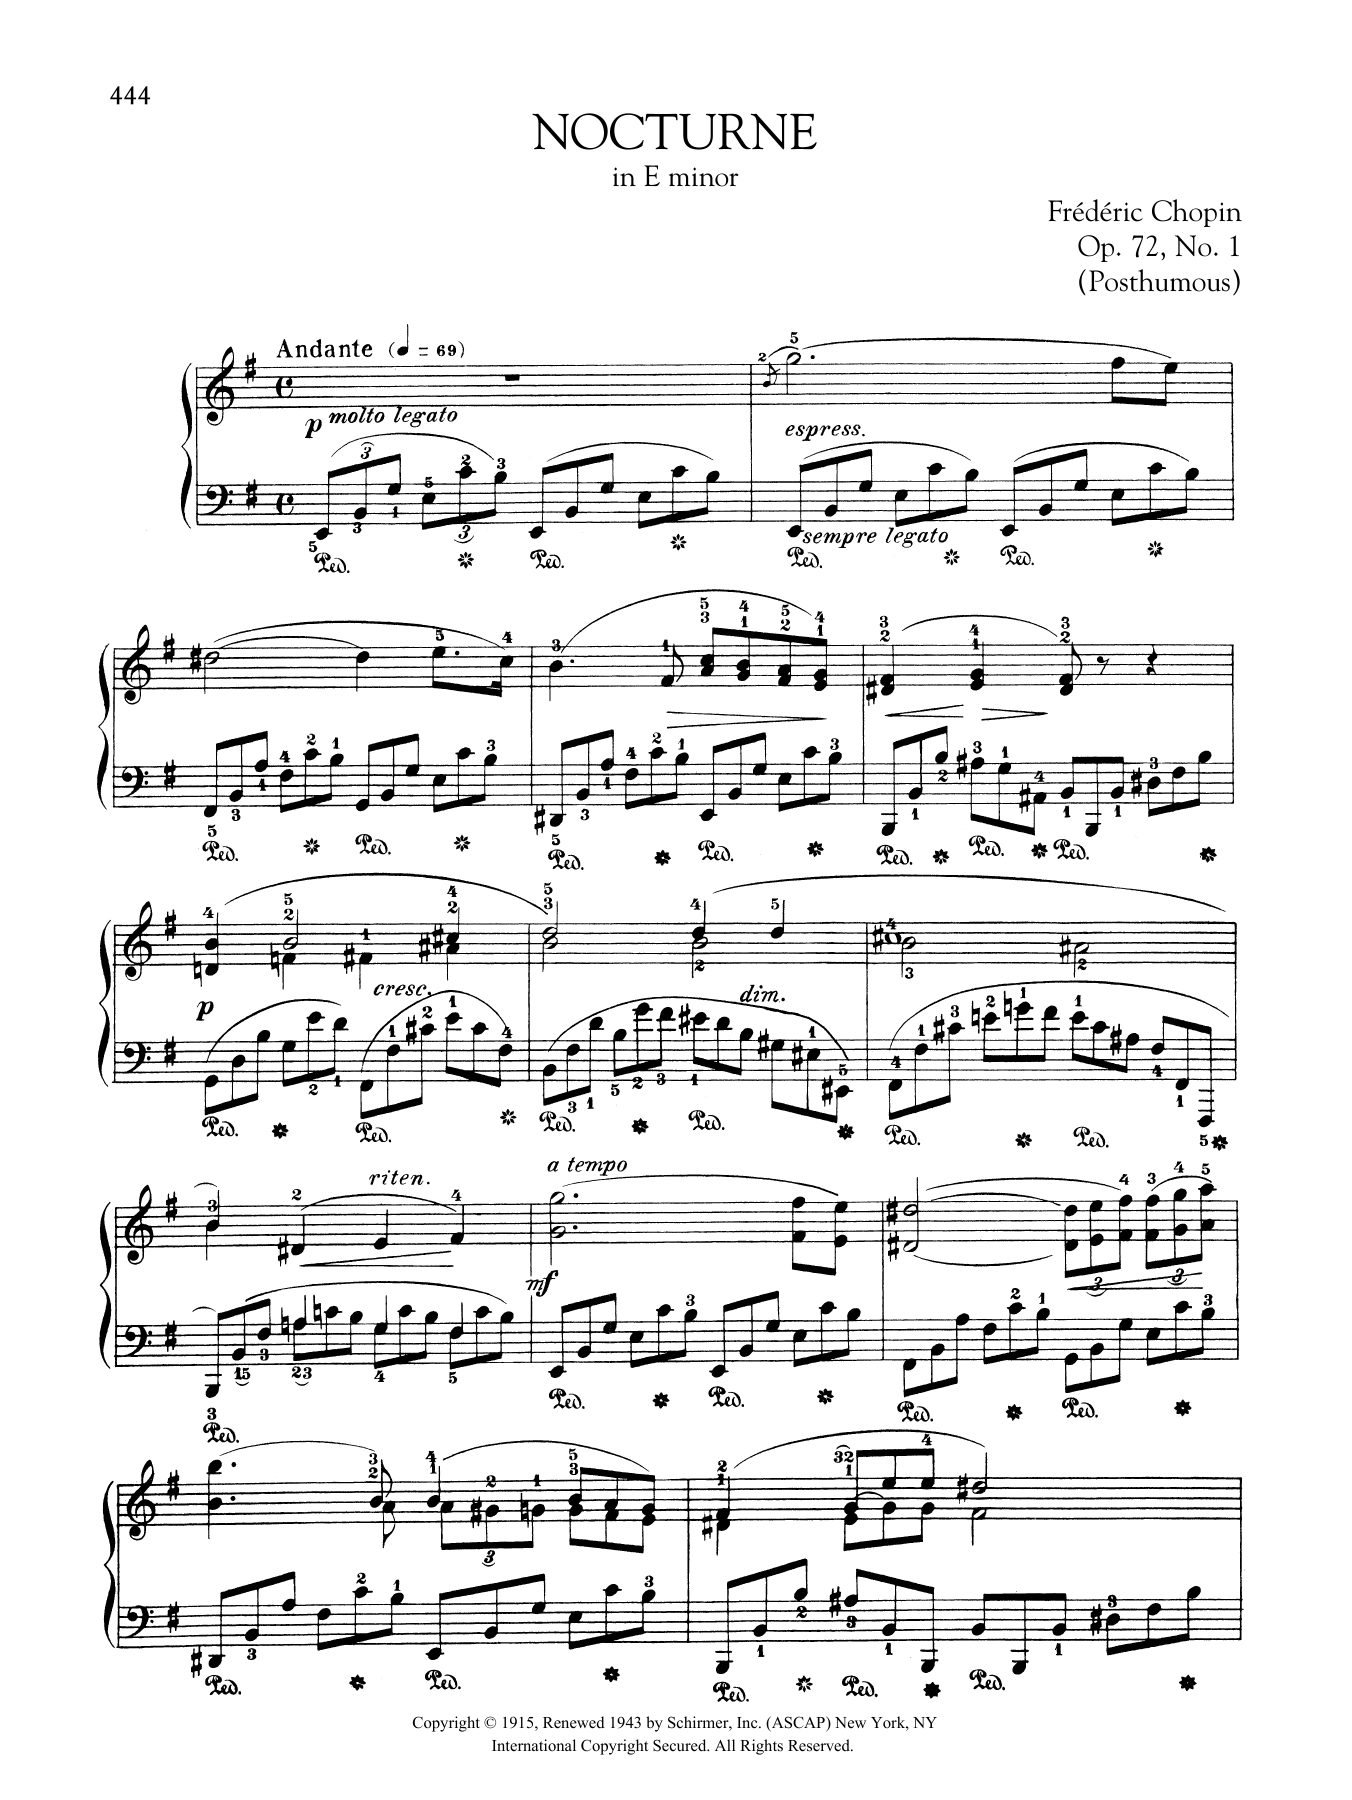 Download Frederic Chopin Nocturne in E minor, Op. 72, No. 1 (Pos Sheet Music